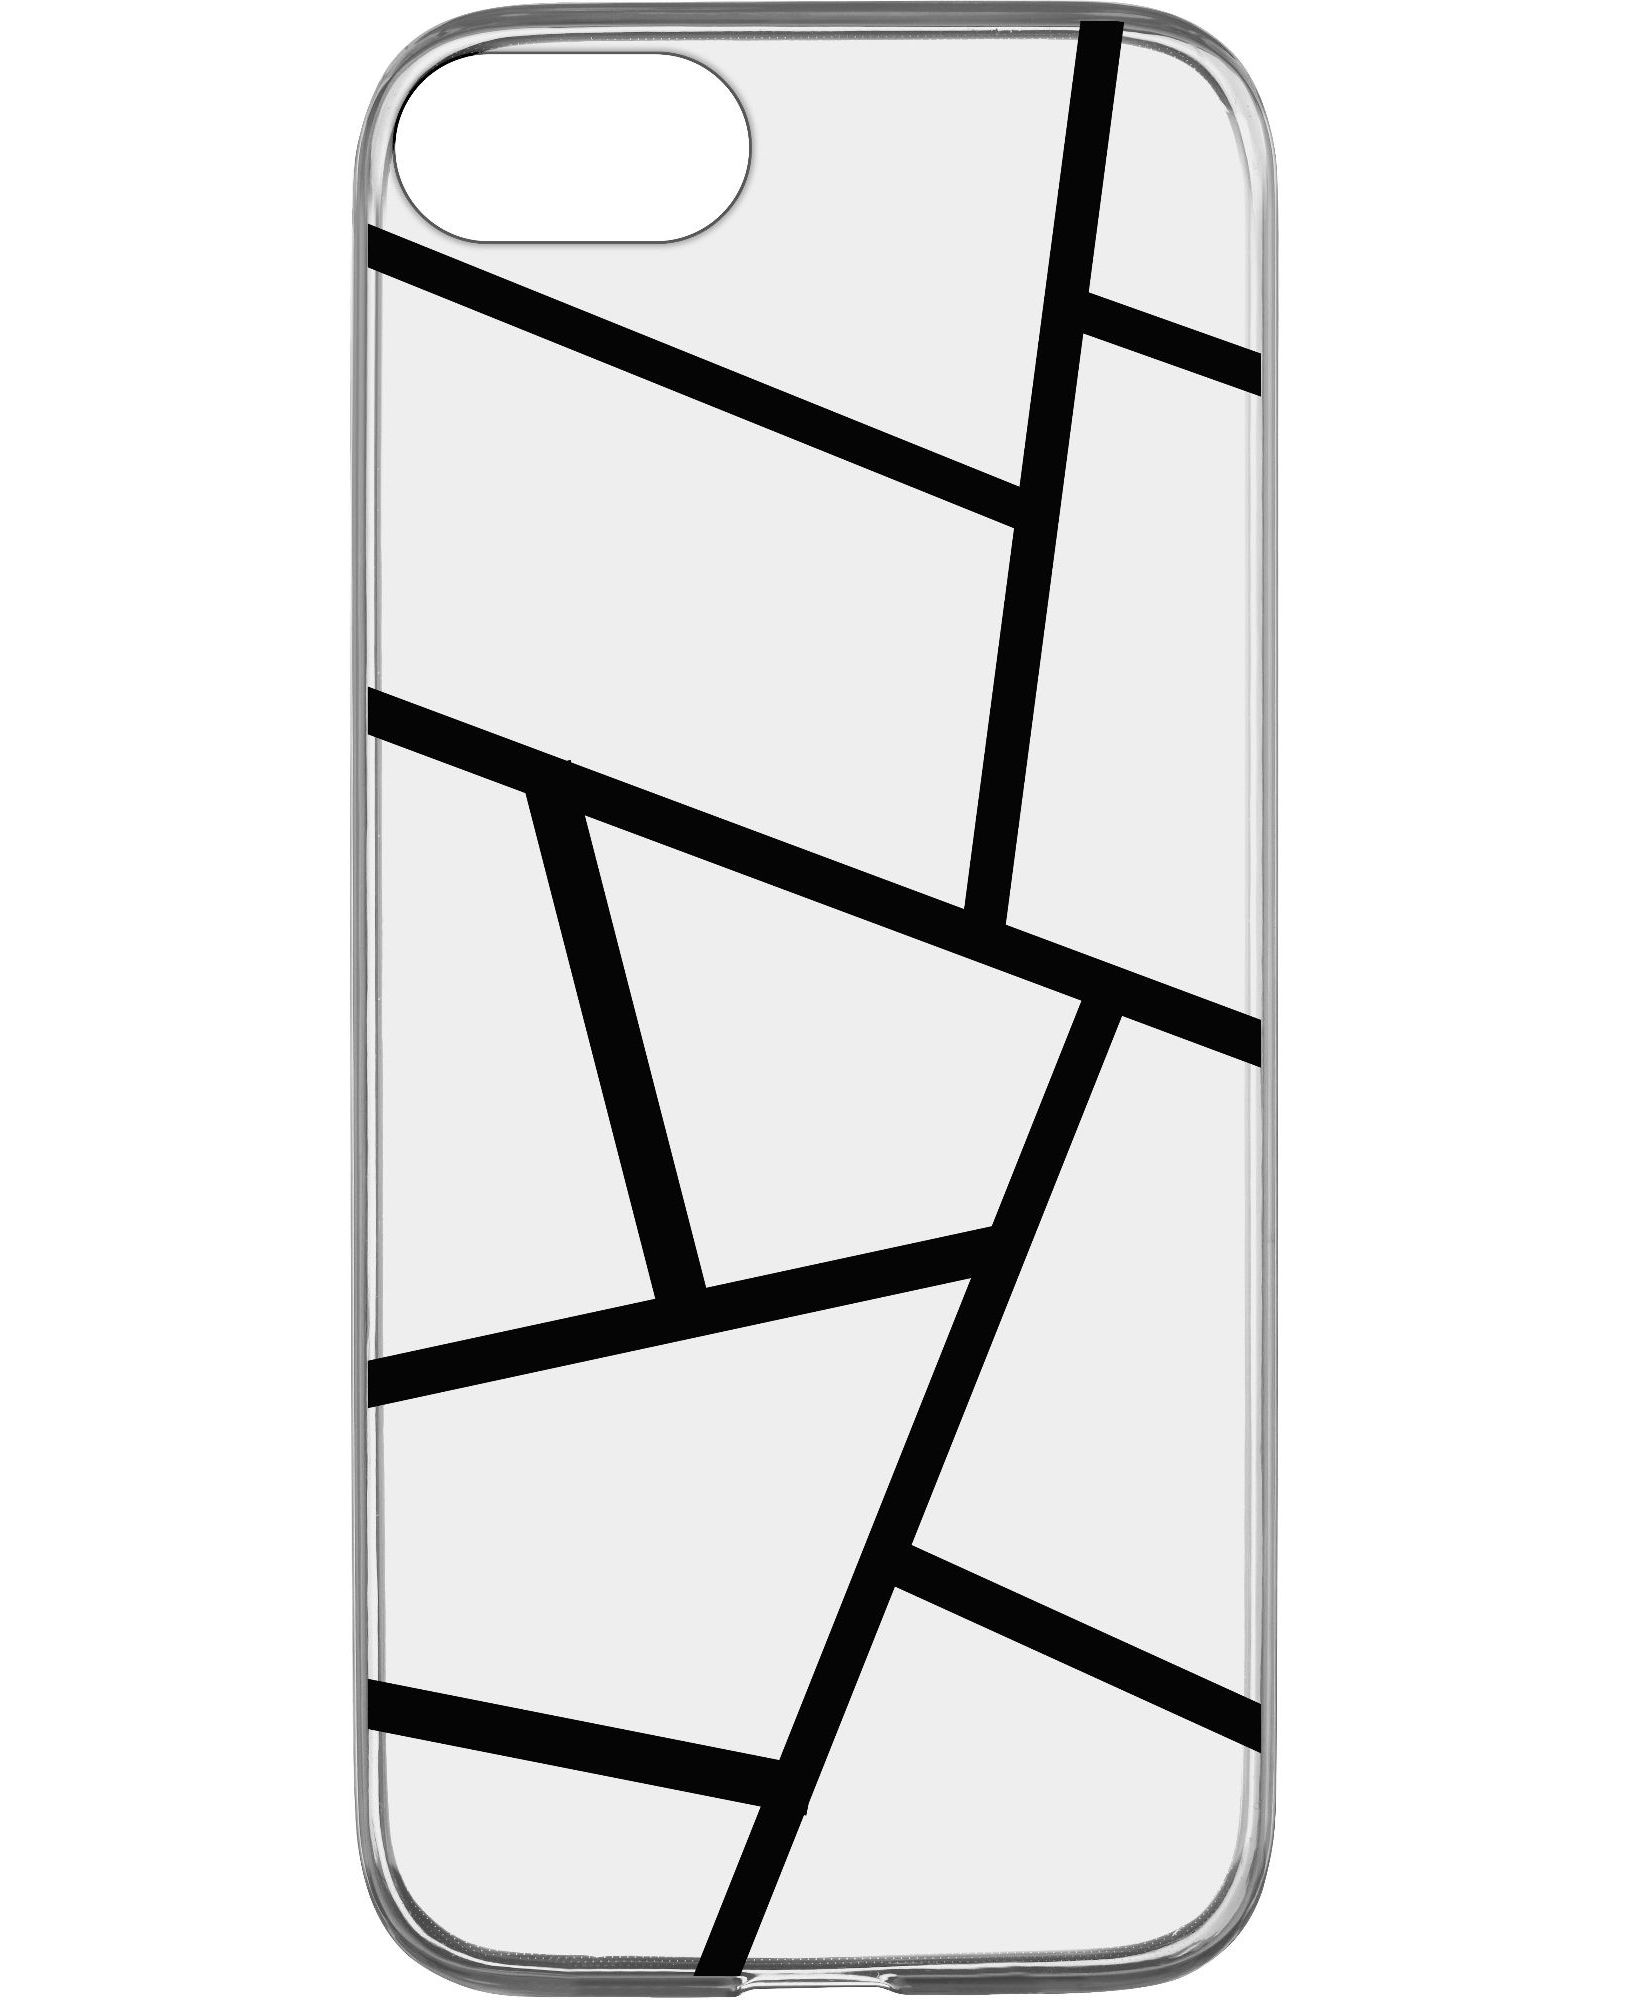 iPhone SE (2020)/8/7/6s/6, case style, architecture